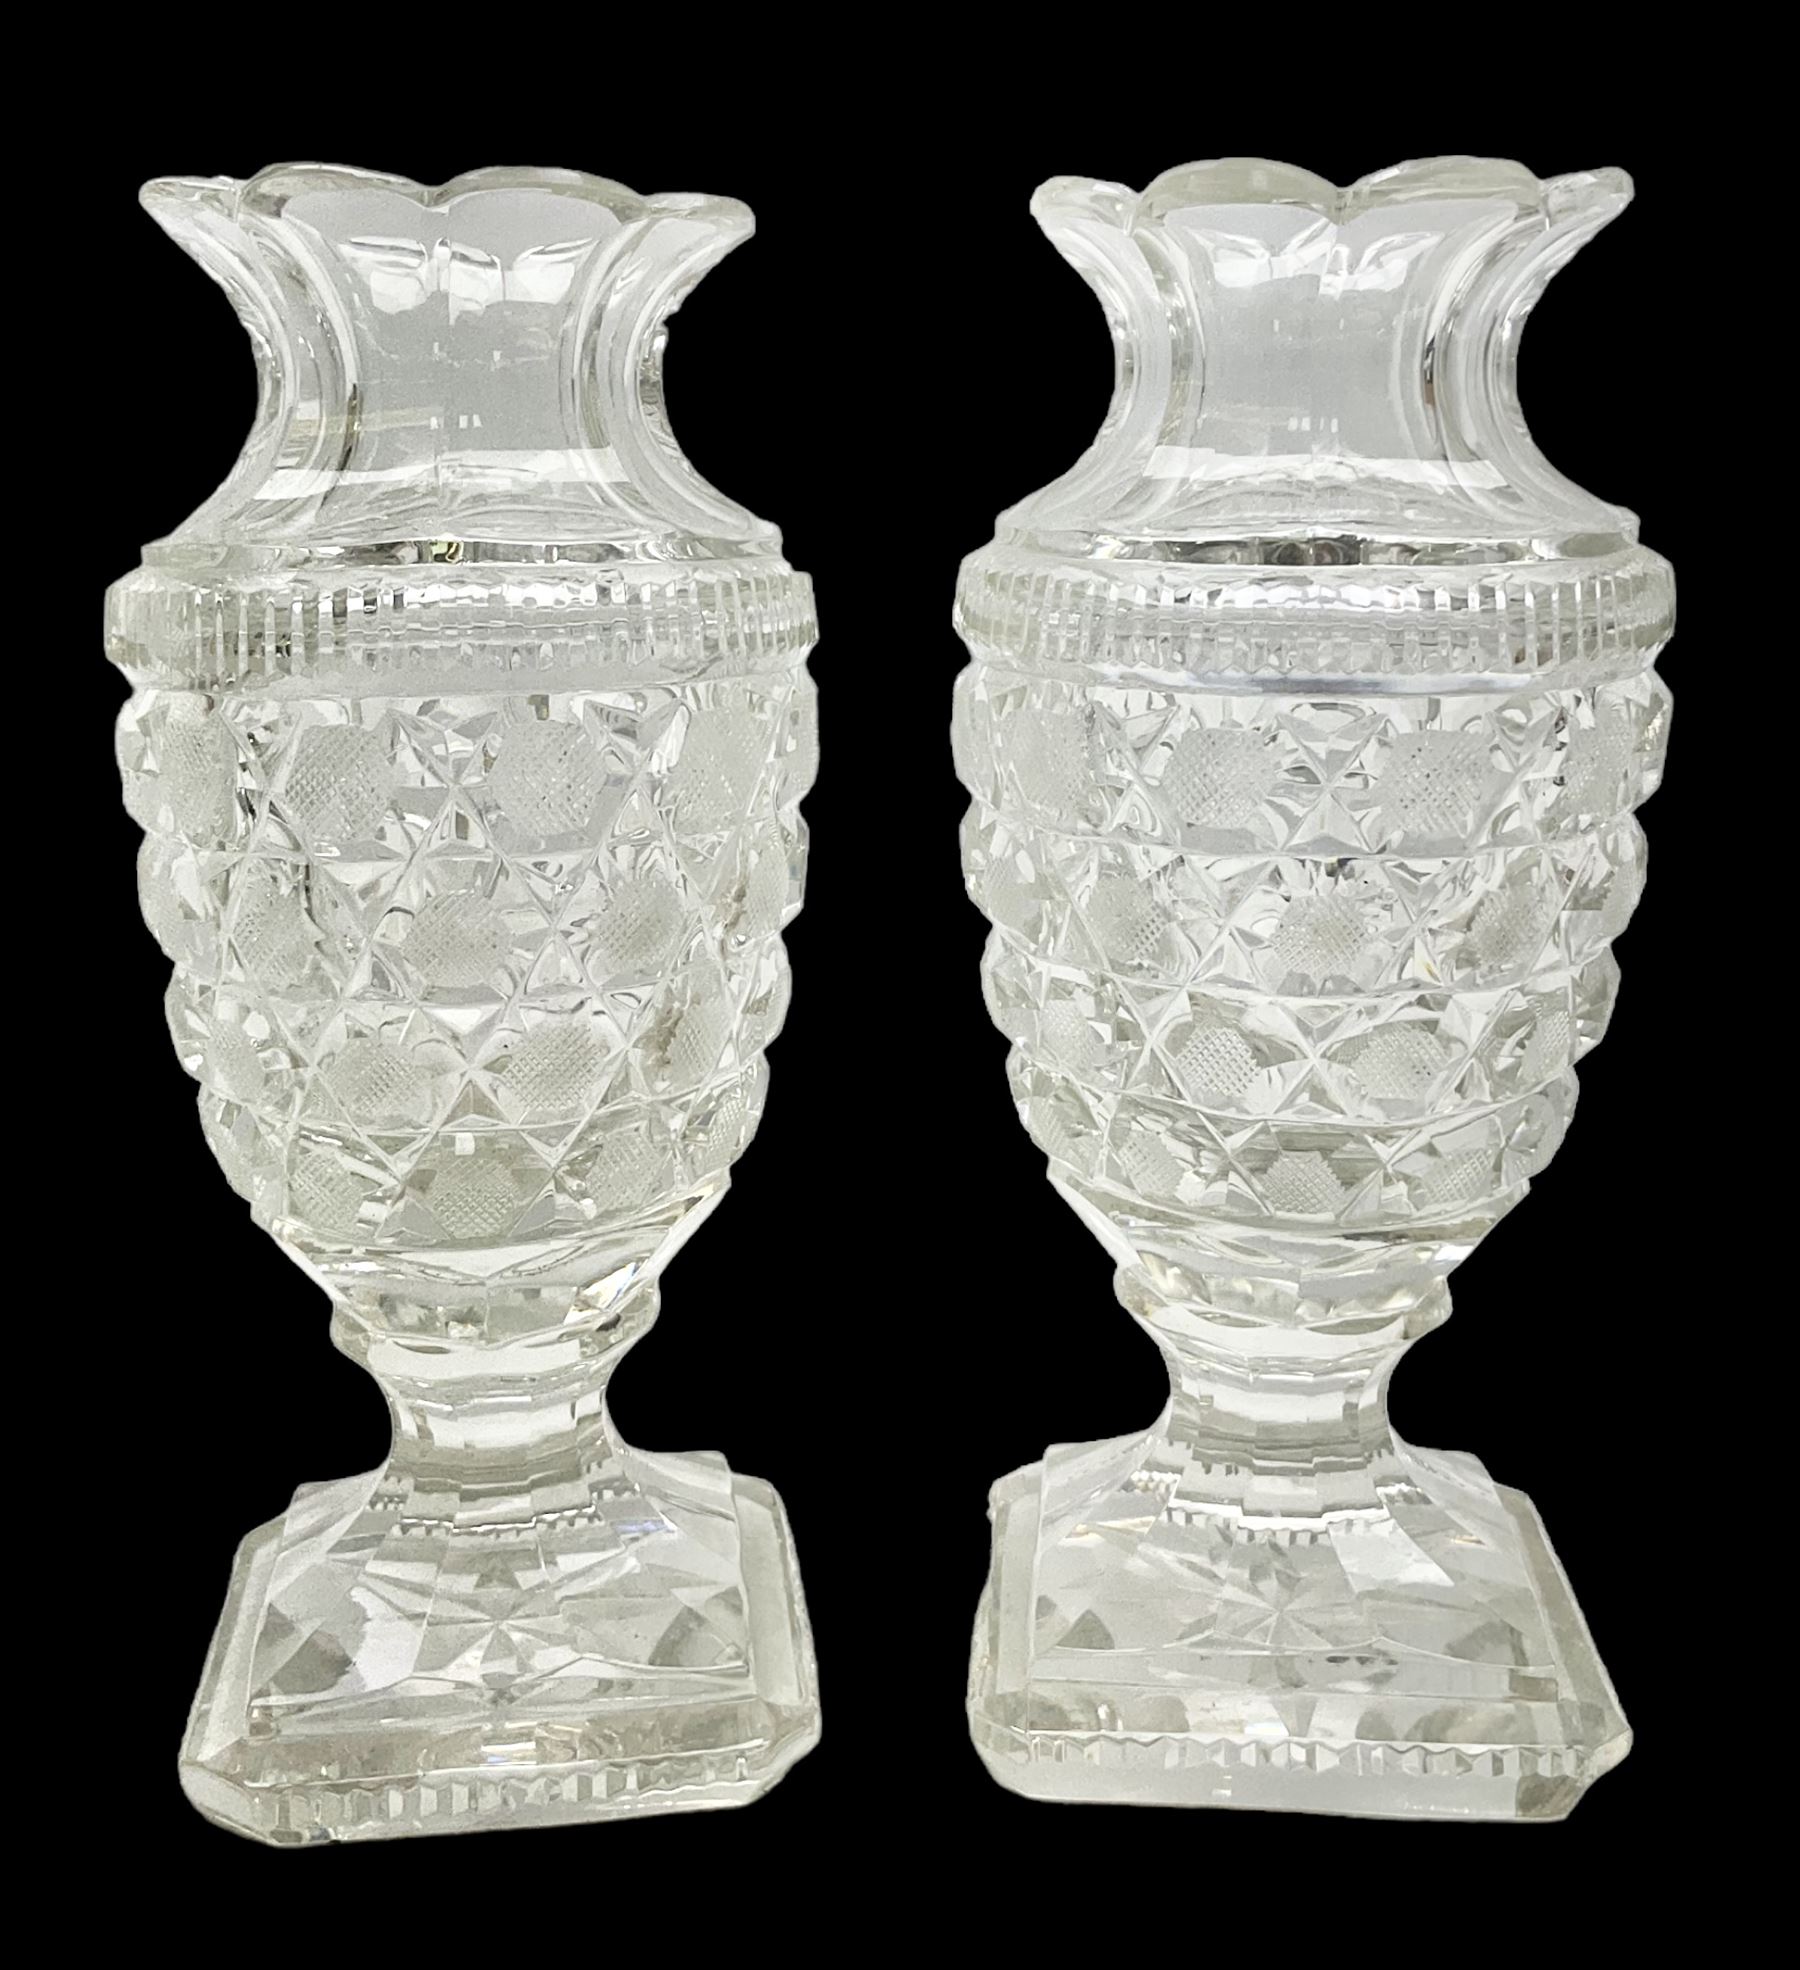 Pair of early 19th century heavy cut glass vases